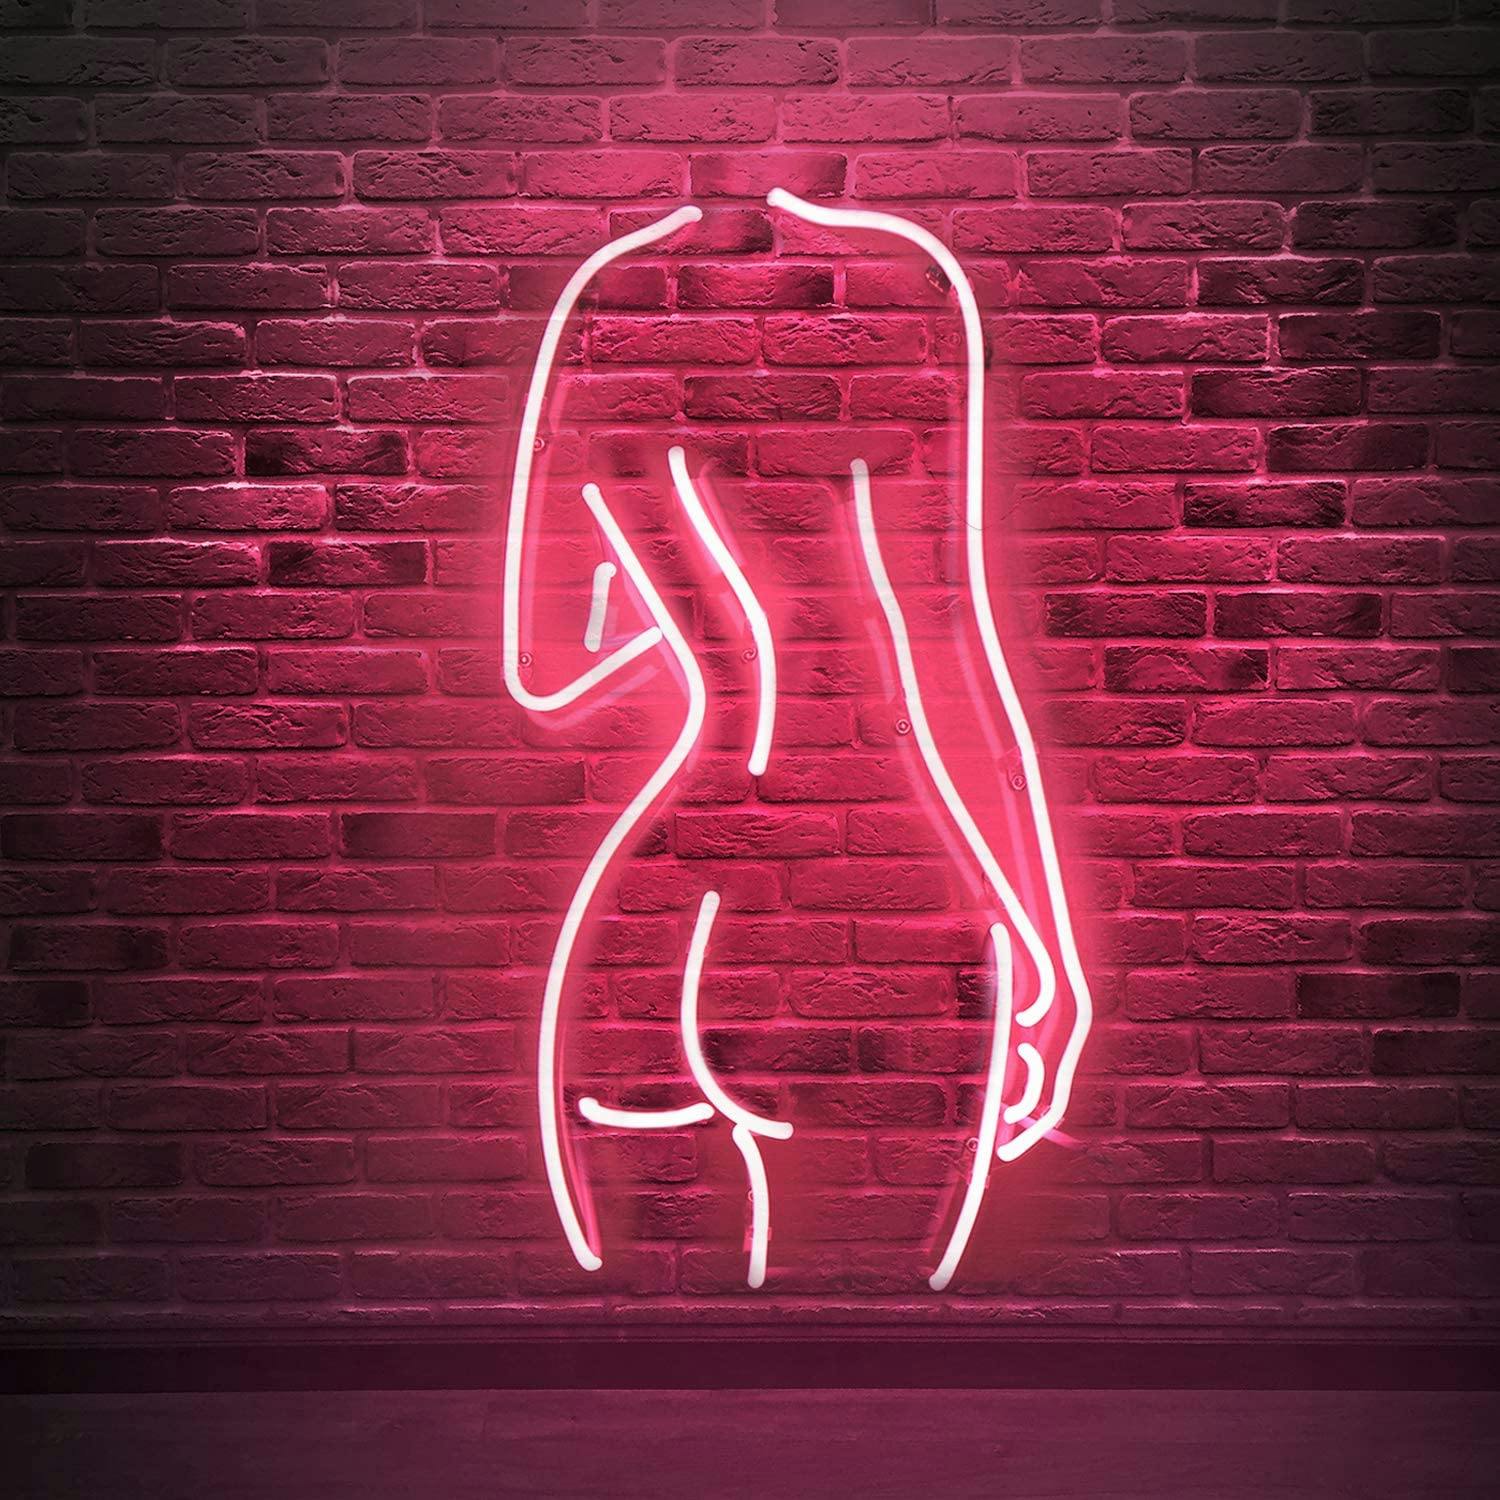 Neon lady sign